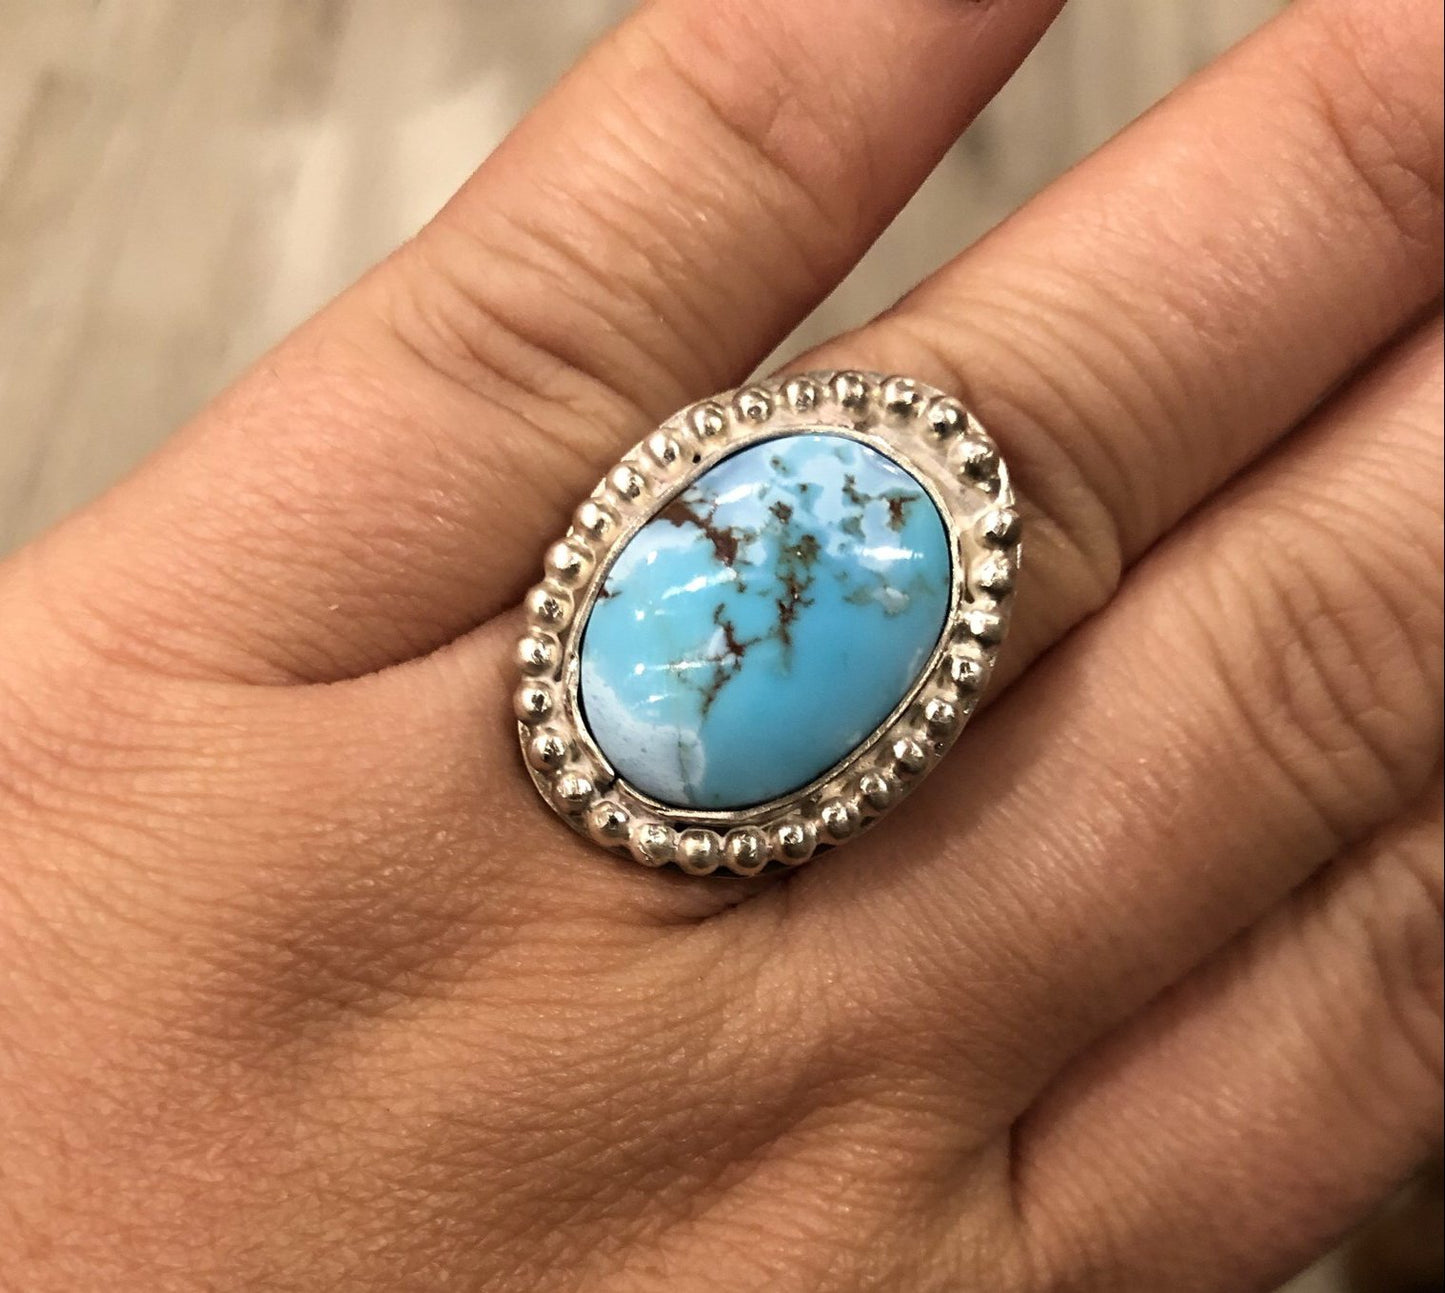 8US Cloudy Golden Hill Turquoise w/ Kendall Band Sterling Silver Ring